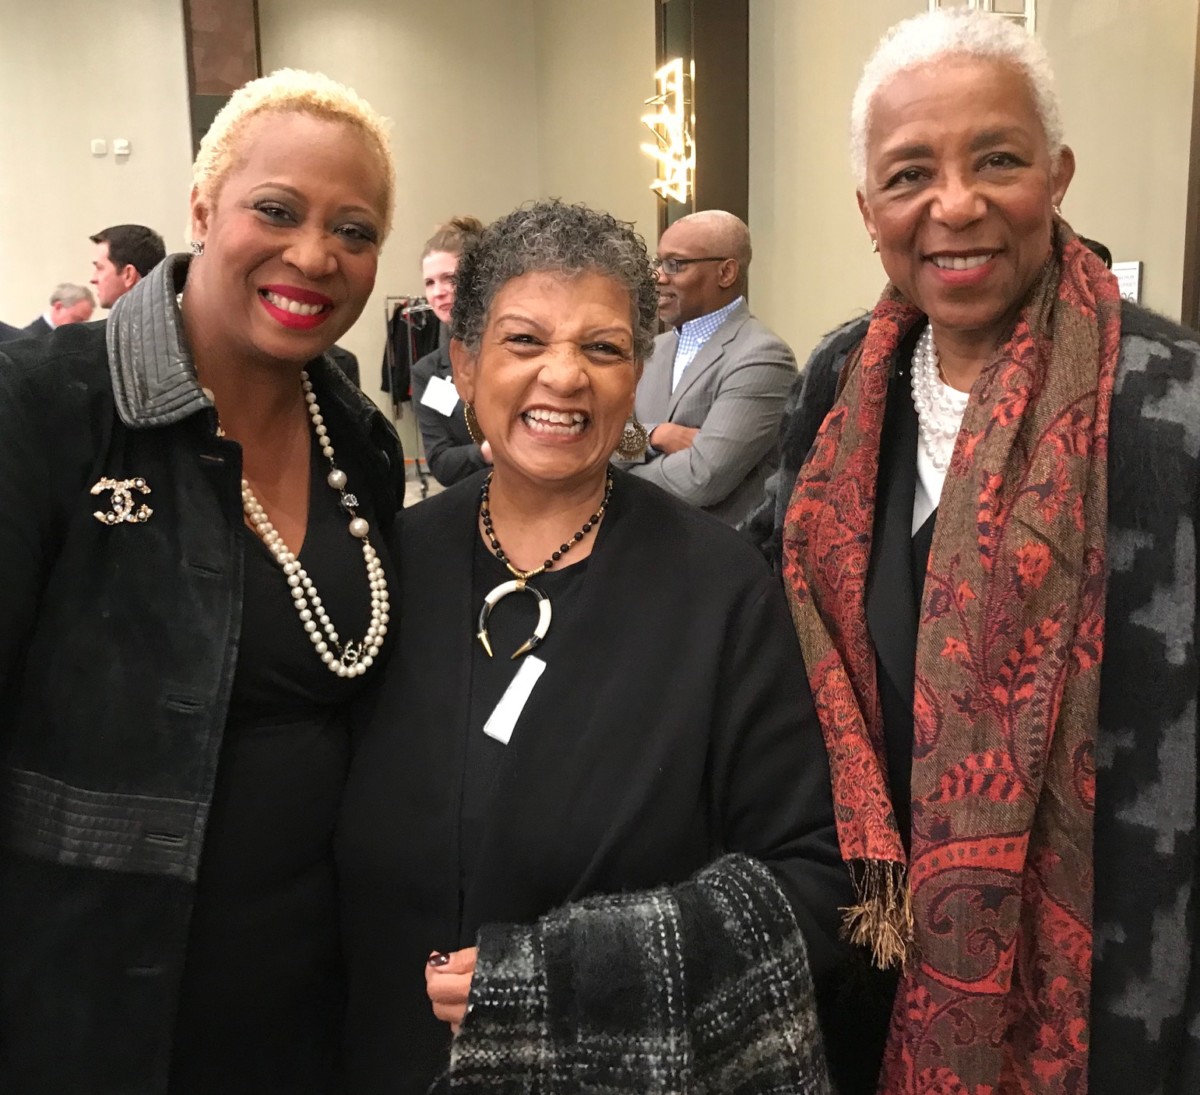 Former MARTA CEO and General Manager Beverly Scott (center) with guests at the State of MARTA breakfast. Credit: Kelly Jordan